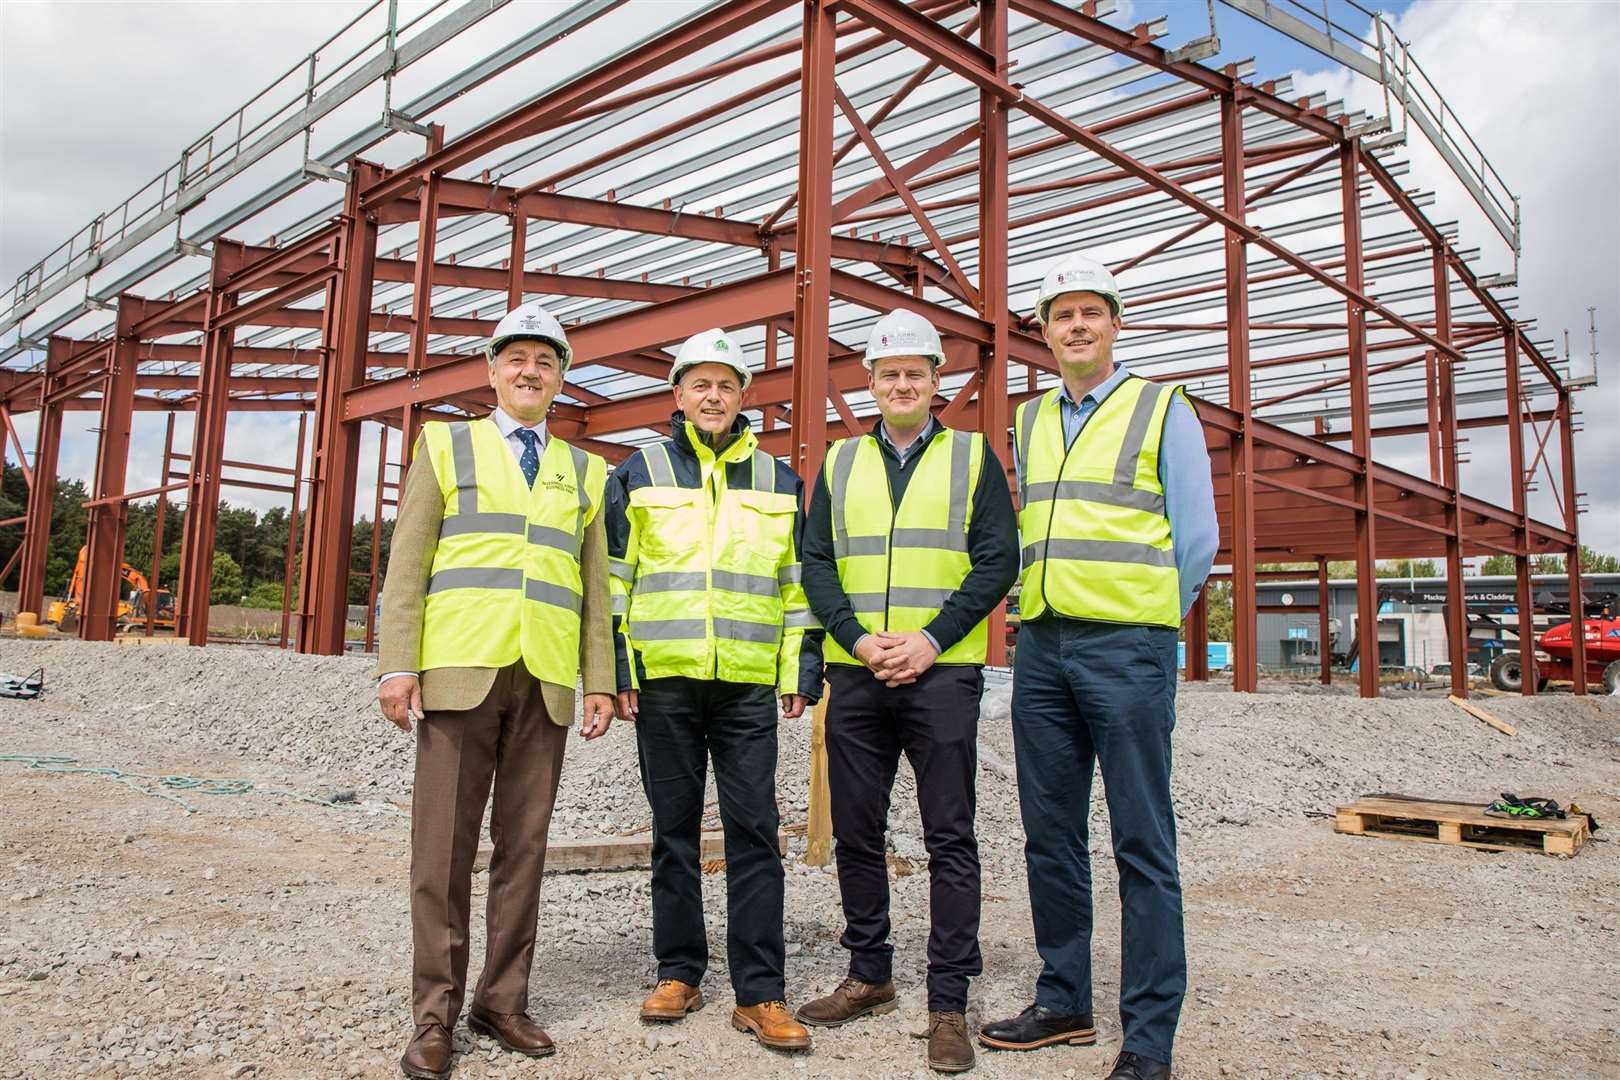 James Campbell, Willie Gray, Brian Innes and Keith Duncan at the site.